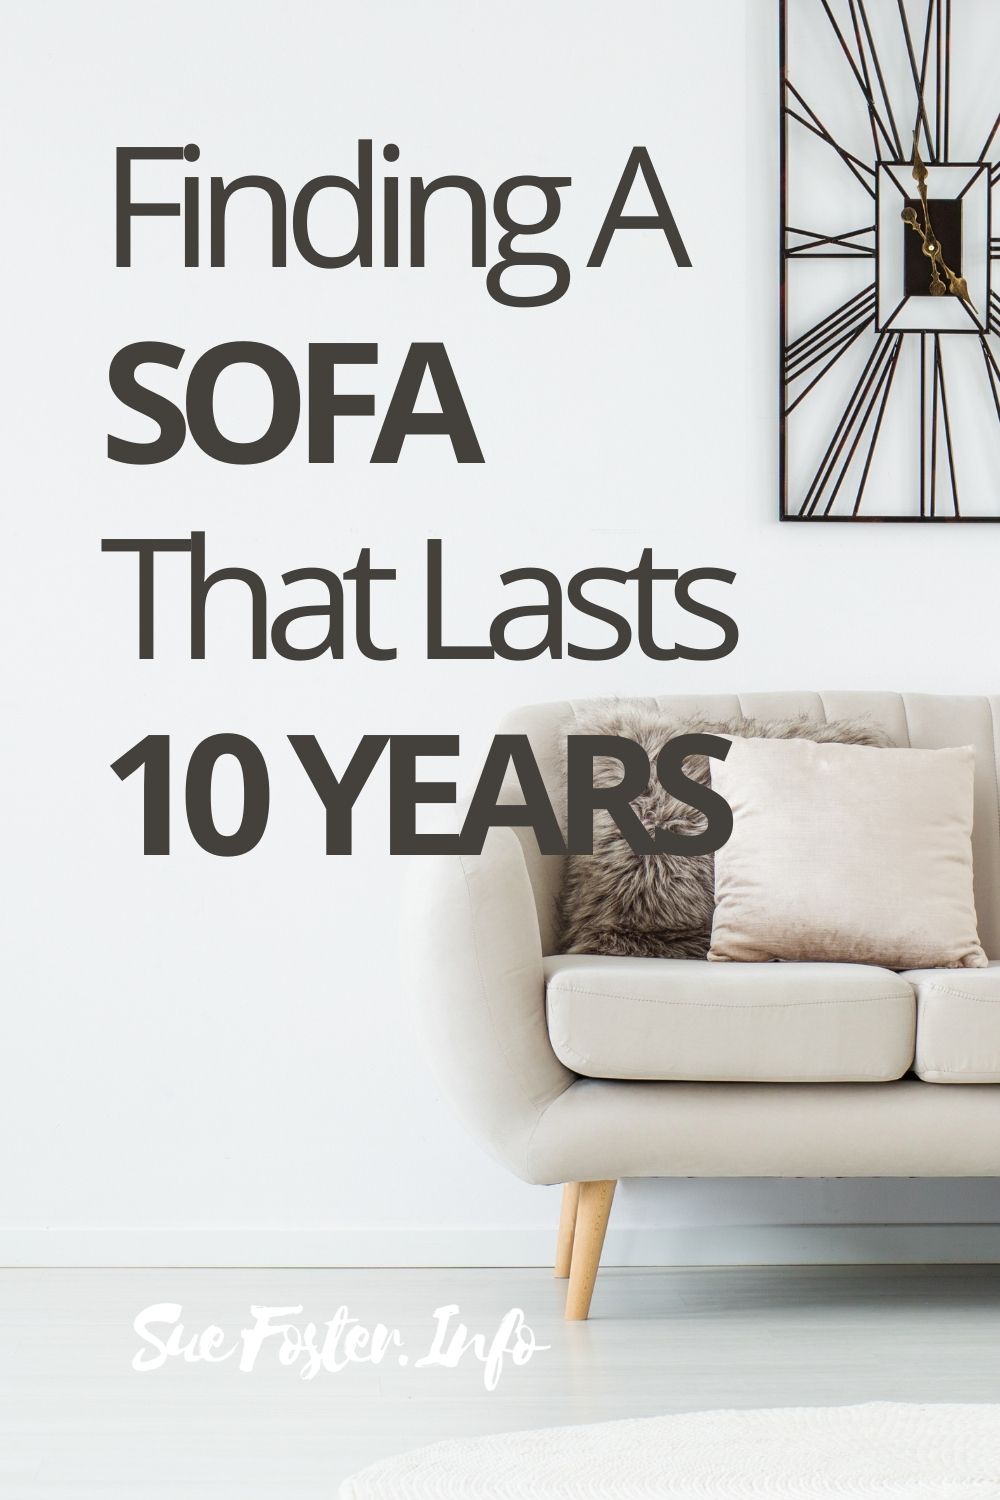 Finding a sofa that lasts 10 years